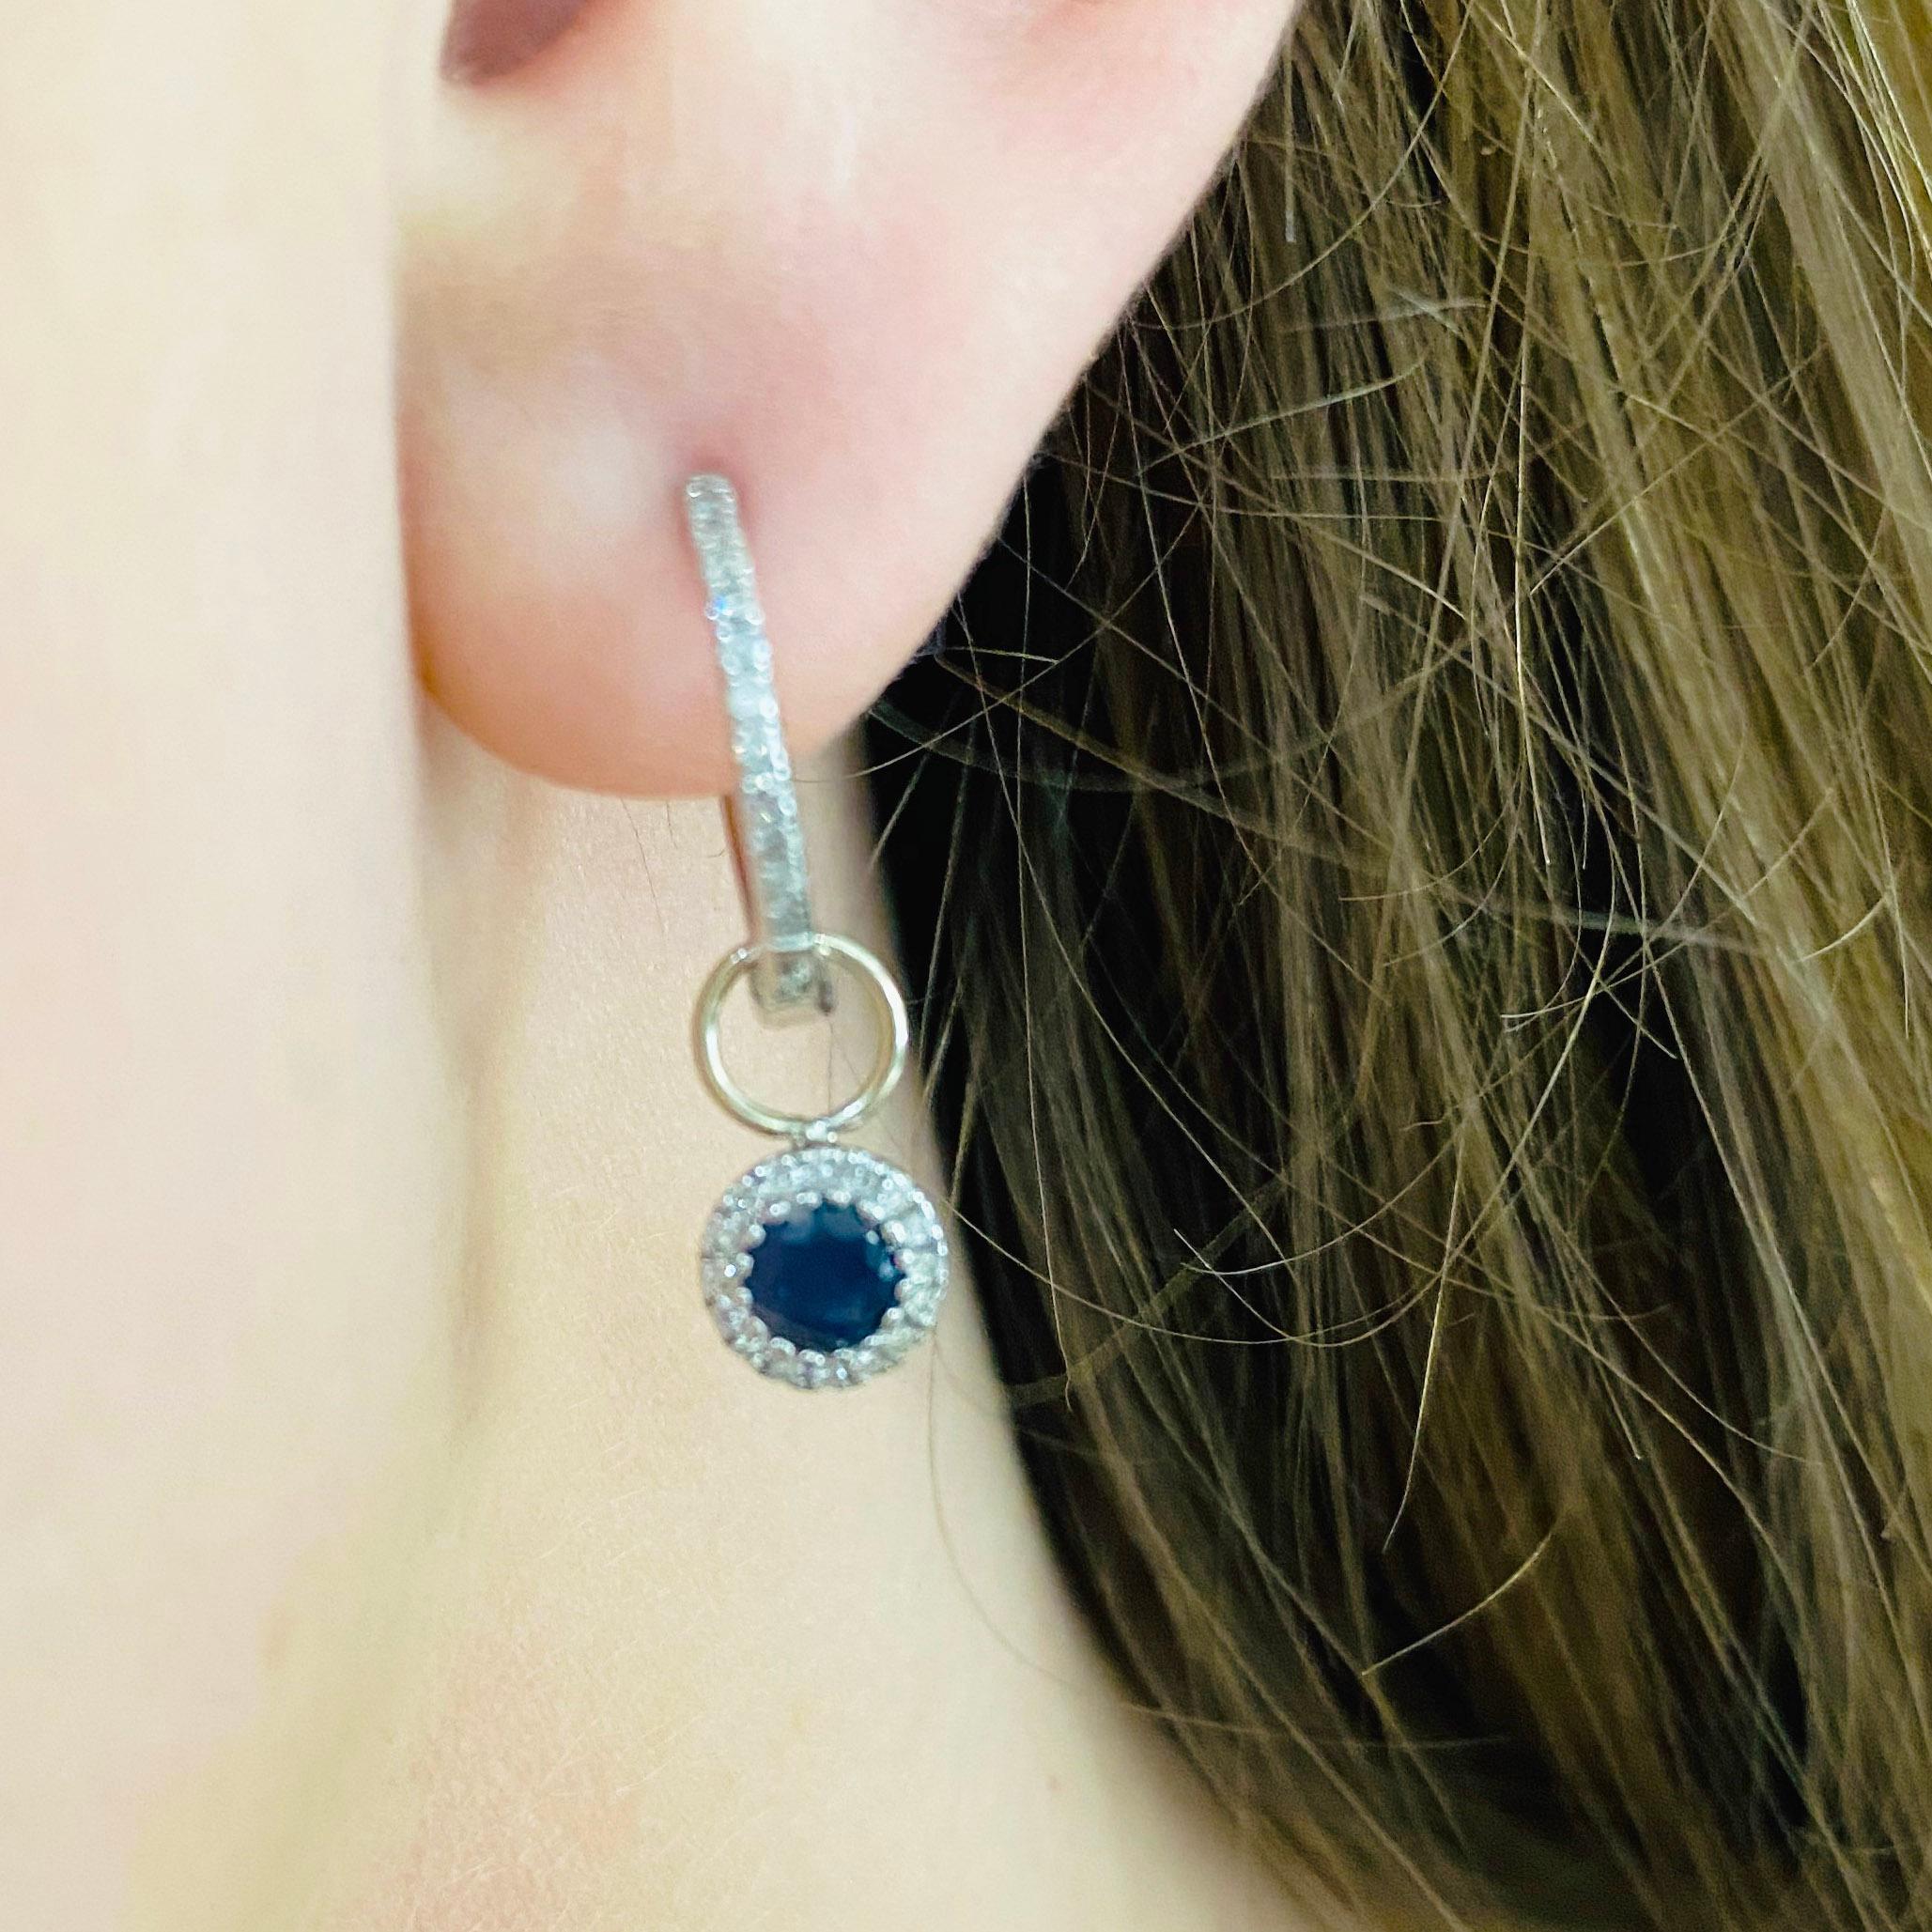 These stunning earring charms are the perfect way to dress up any pair of hoops! With polished 14k white gold surrounding a brilliant round blue sapphire and dripping with white diamonds, these charms make the perfect chic and modern accessory for